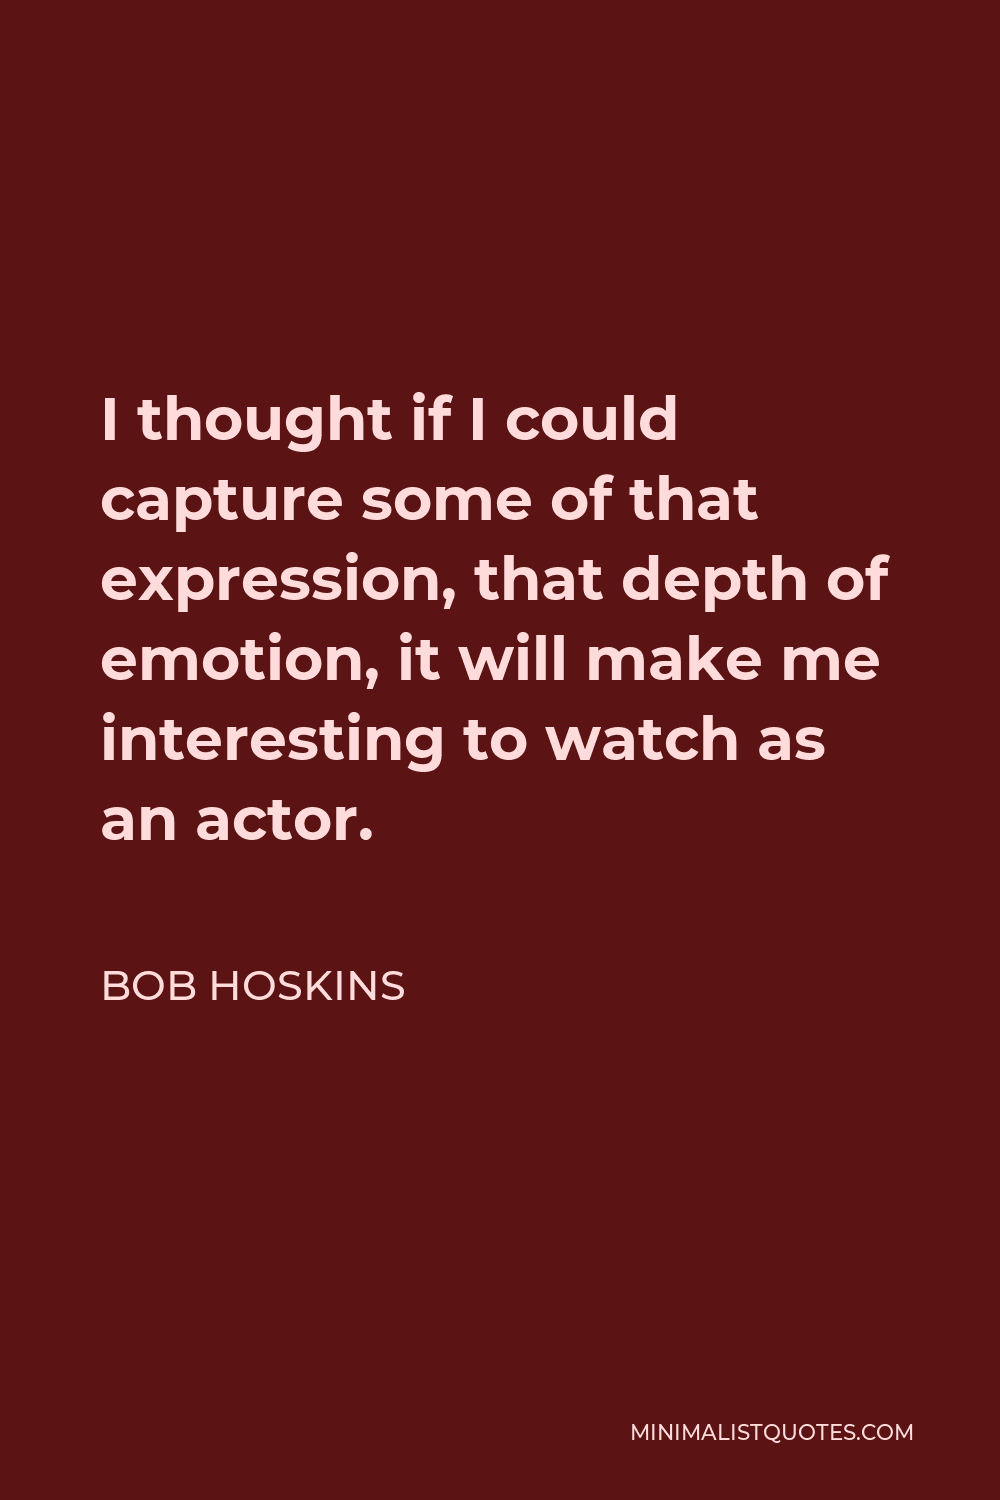 Bob Hoskins Quote - I thought if I could capture some of that expression, that depth of emotion, it will make me interesting to watch as an actor.